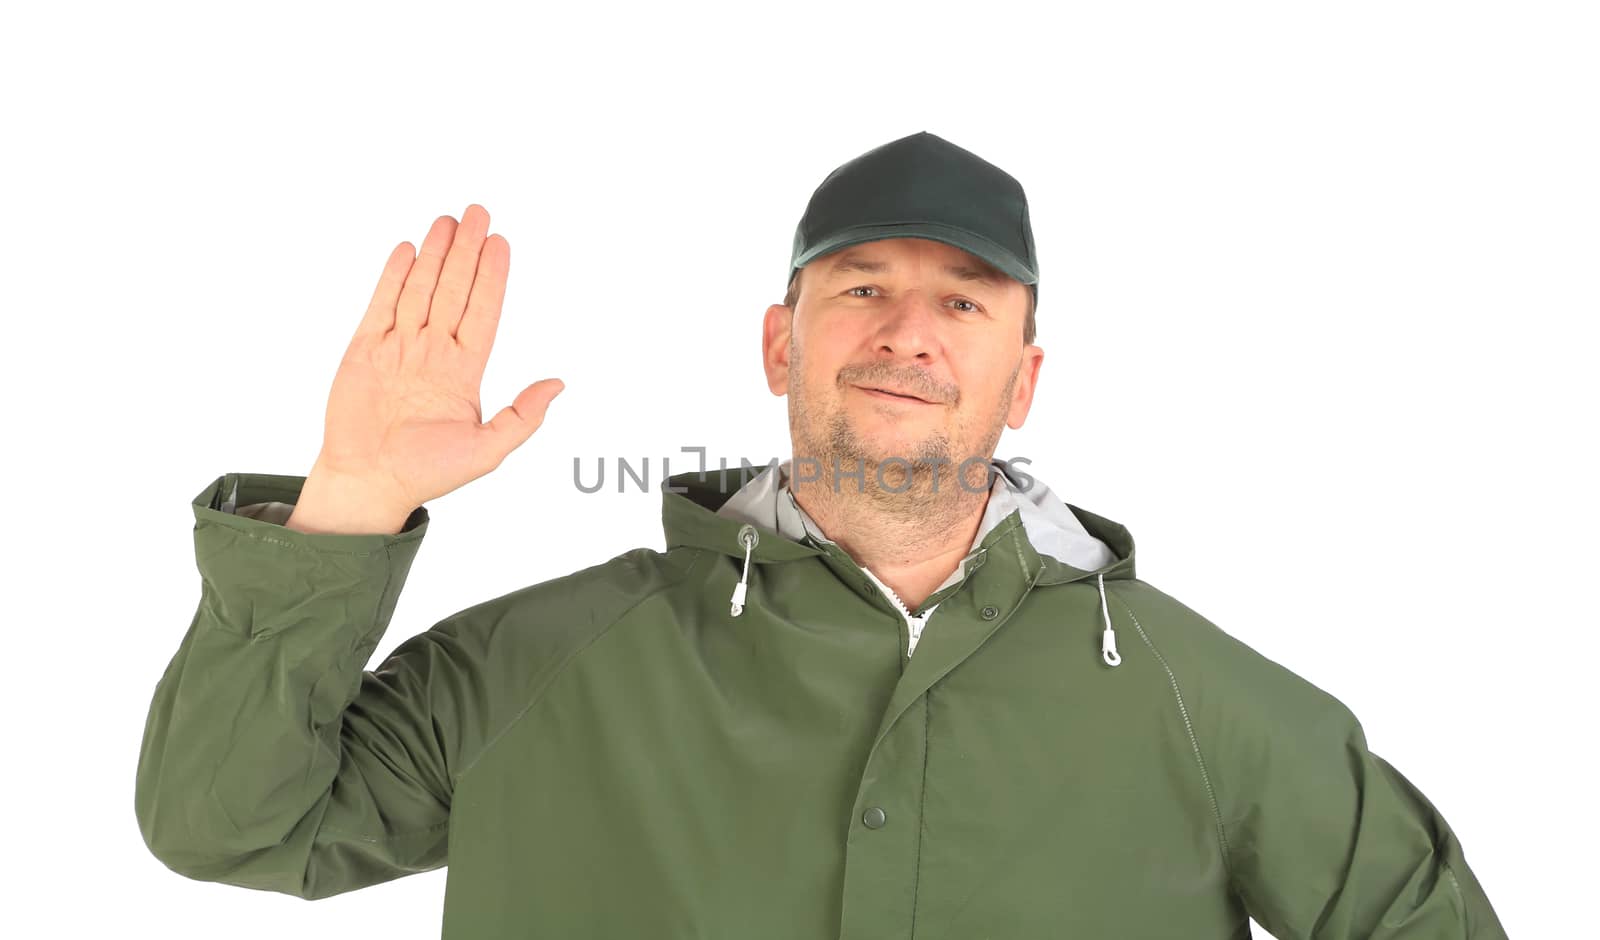 Man in coat shows hand. Isolated on a white background.